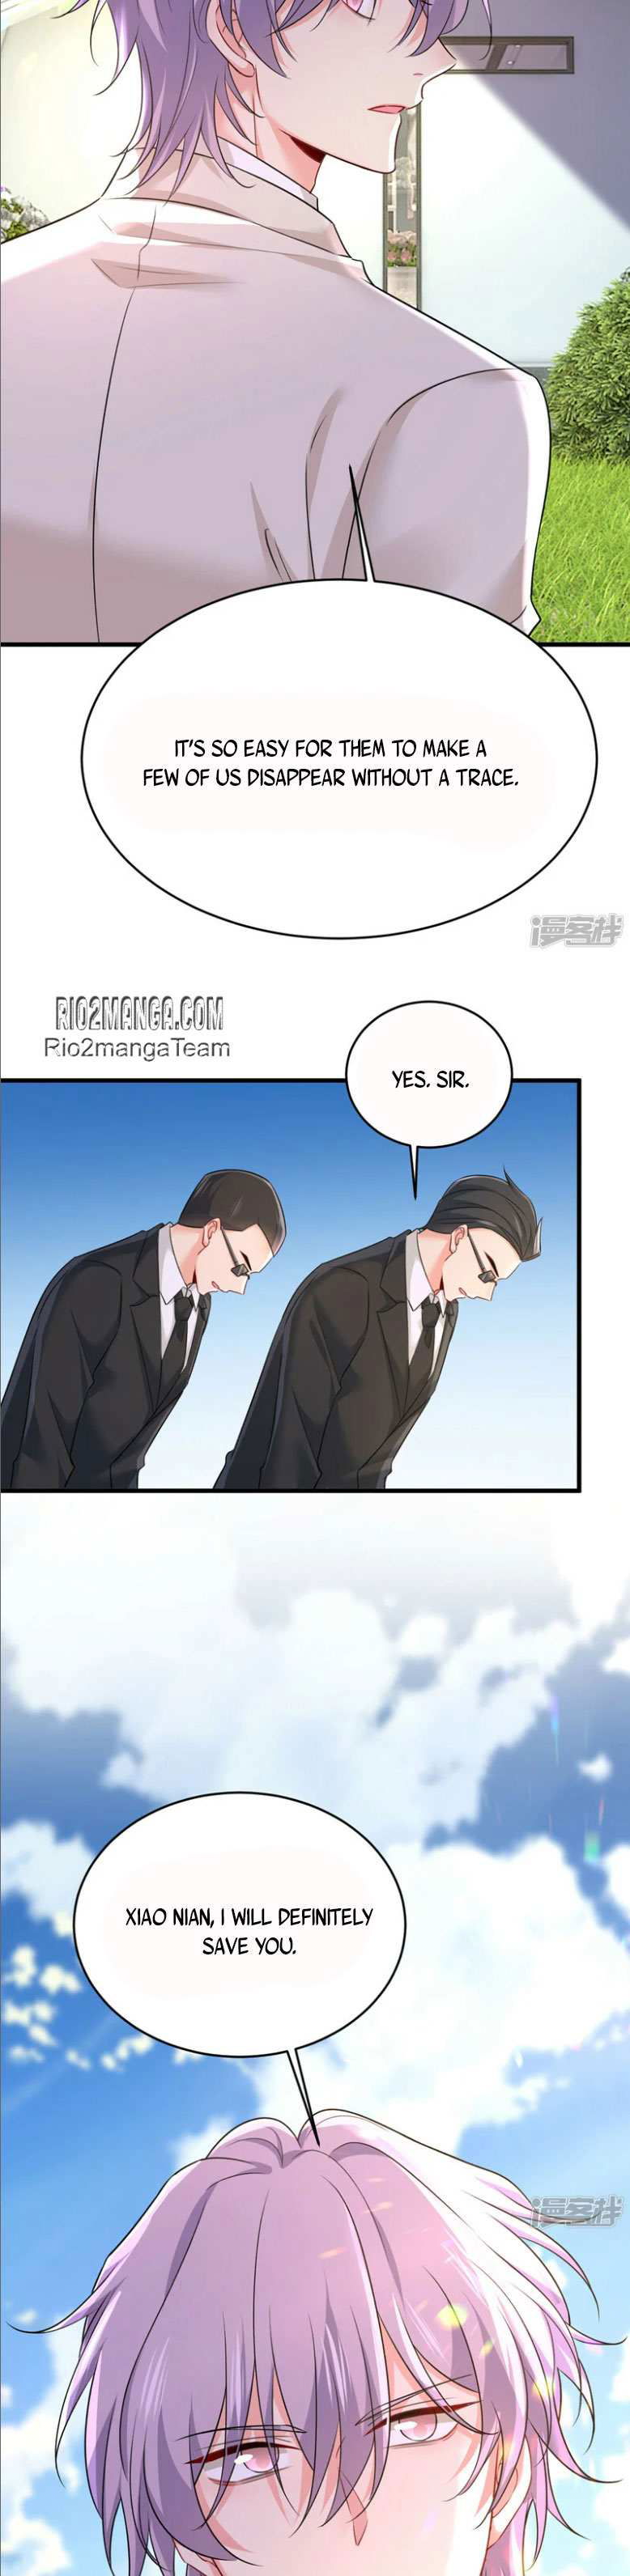 CEO Above, Me Below Chapter 646 page 5